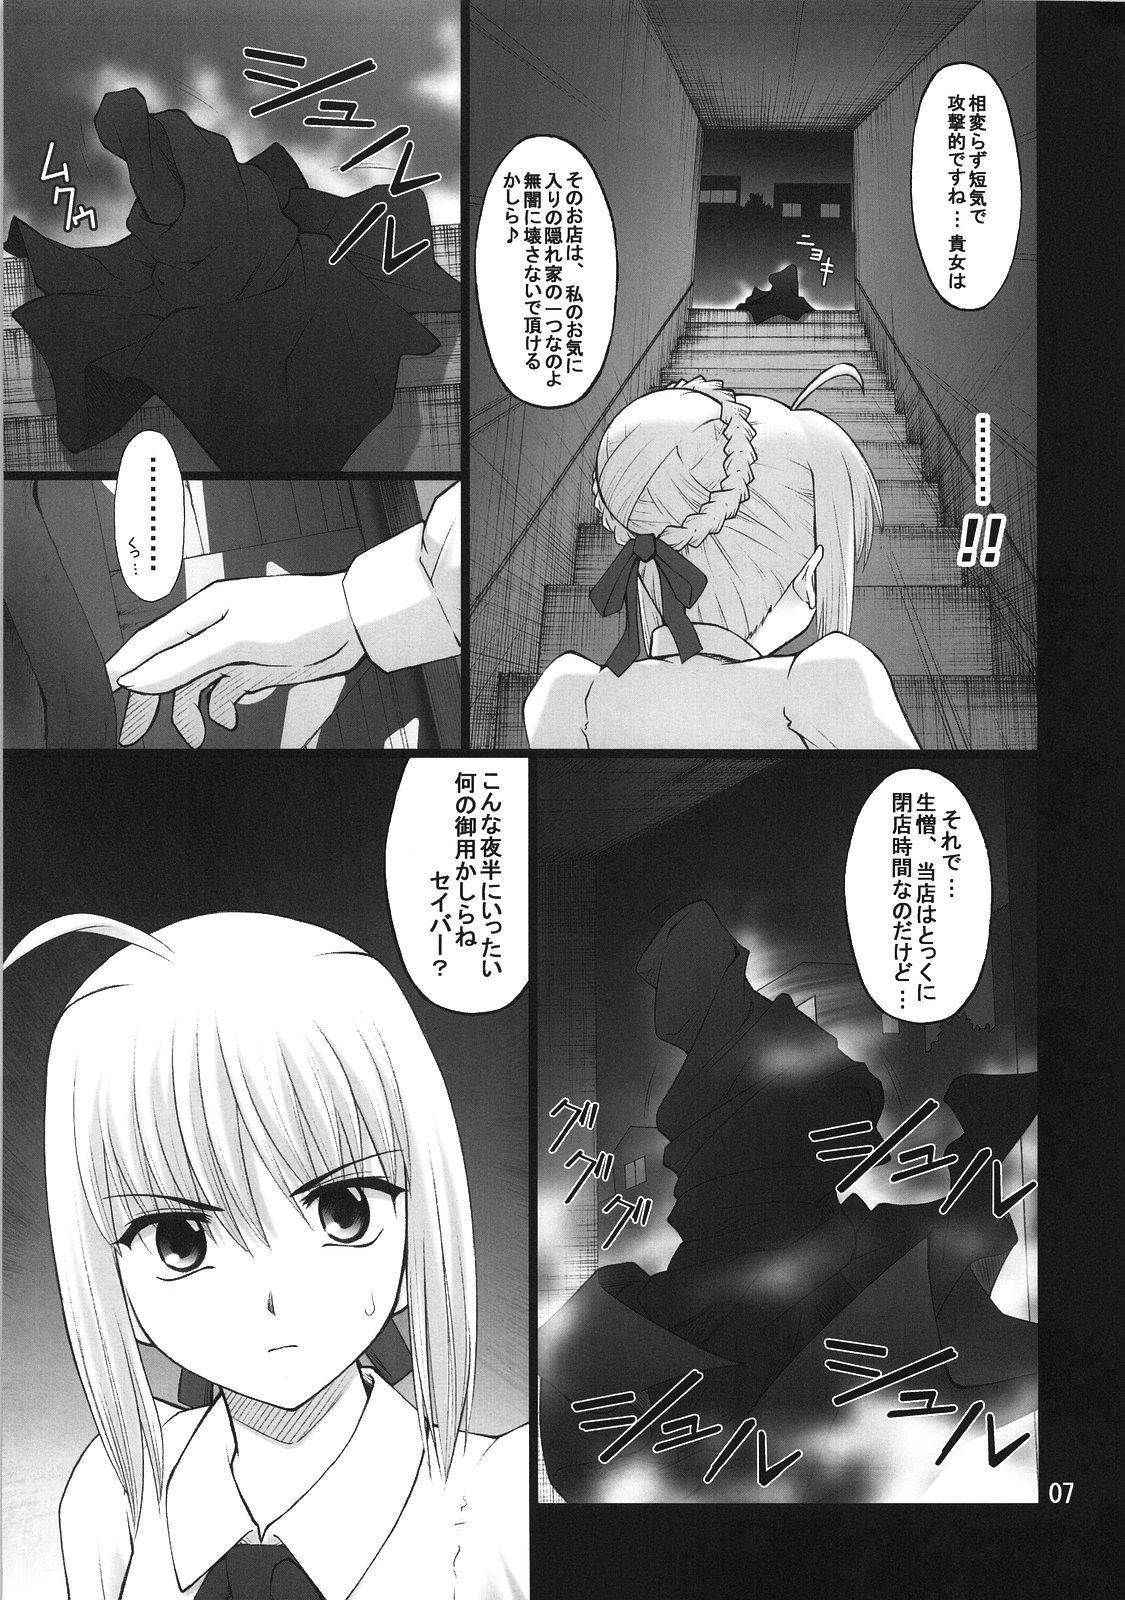 Fuck For Money Grem-Rin 3 - Fate stay night Fate hollow ataraxia Sharing - Page 6